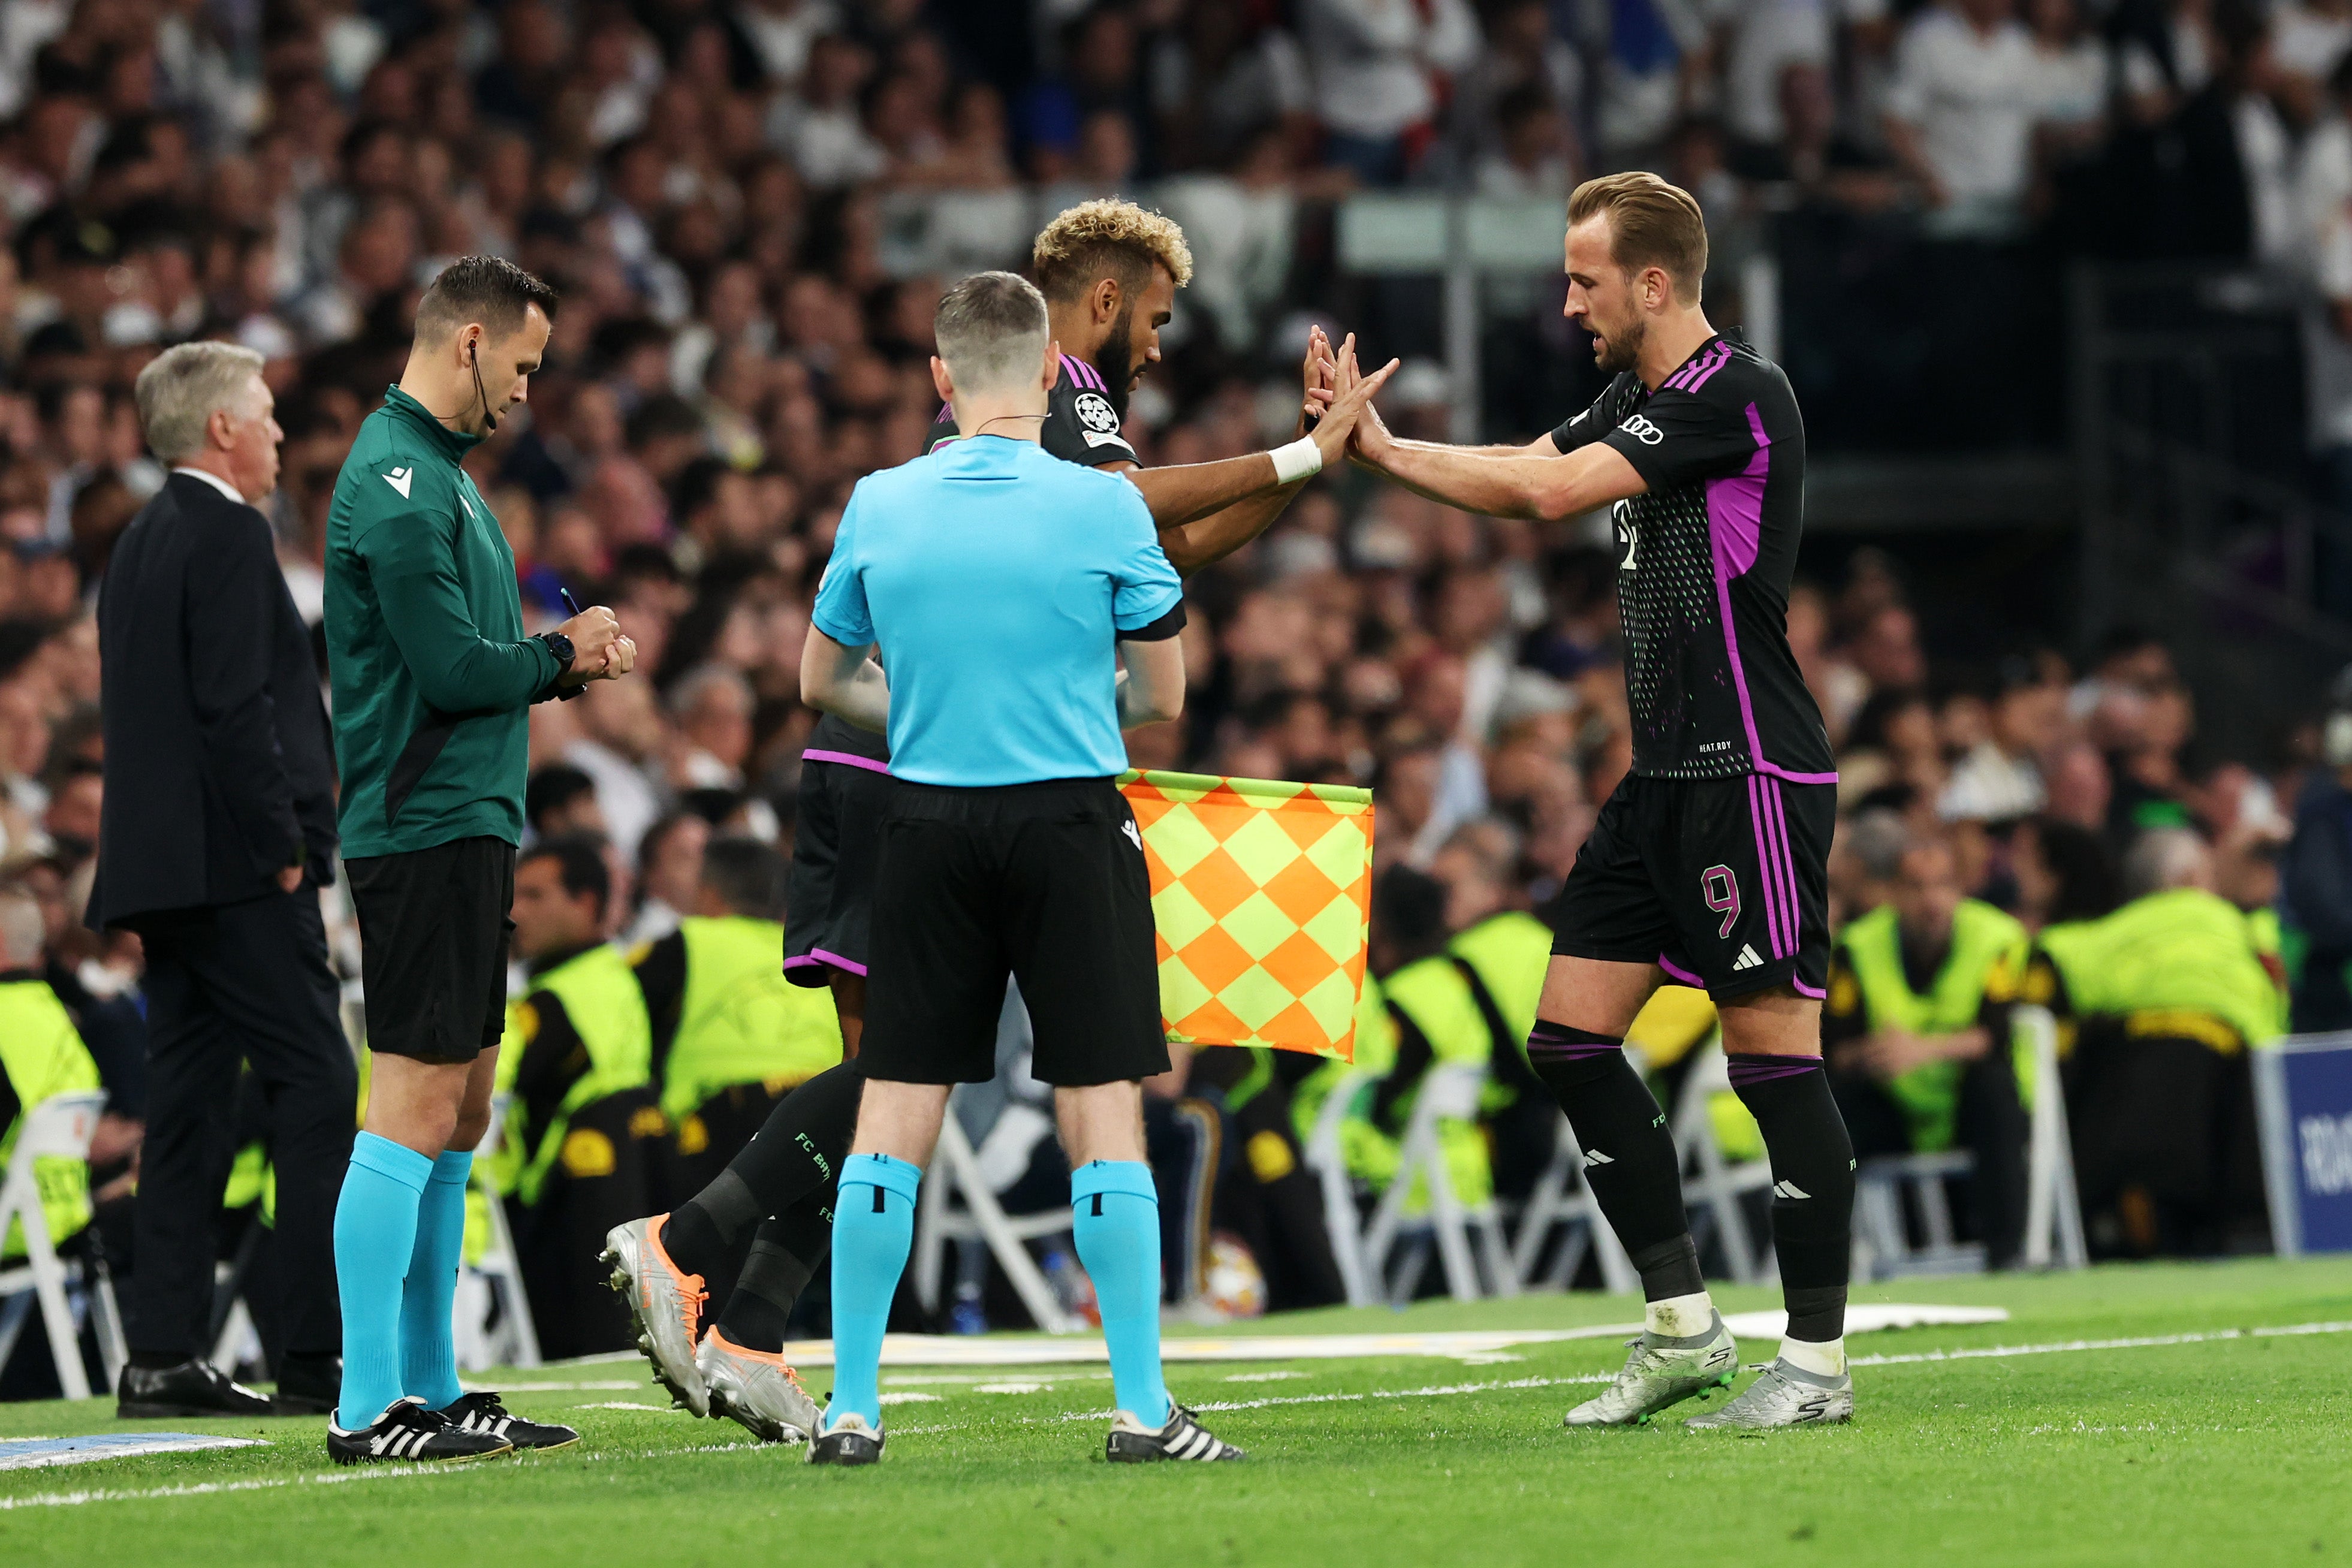 Harry Kane was brought off for Eric Maxim Choupo-Moting in the Bernabeu